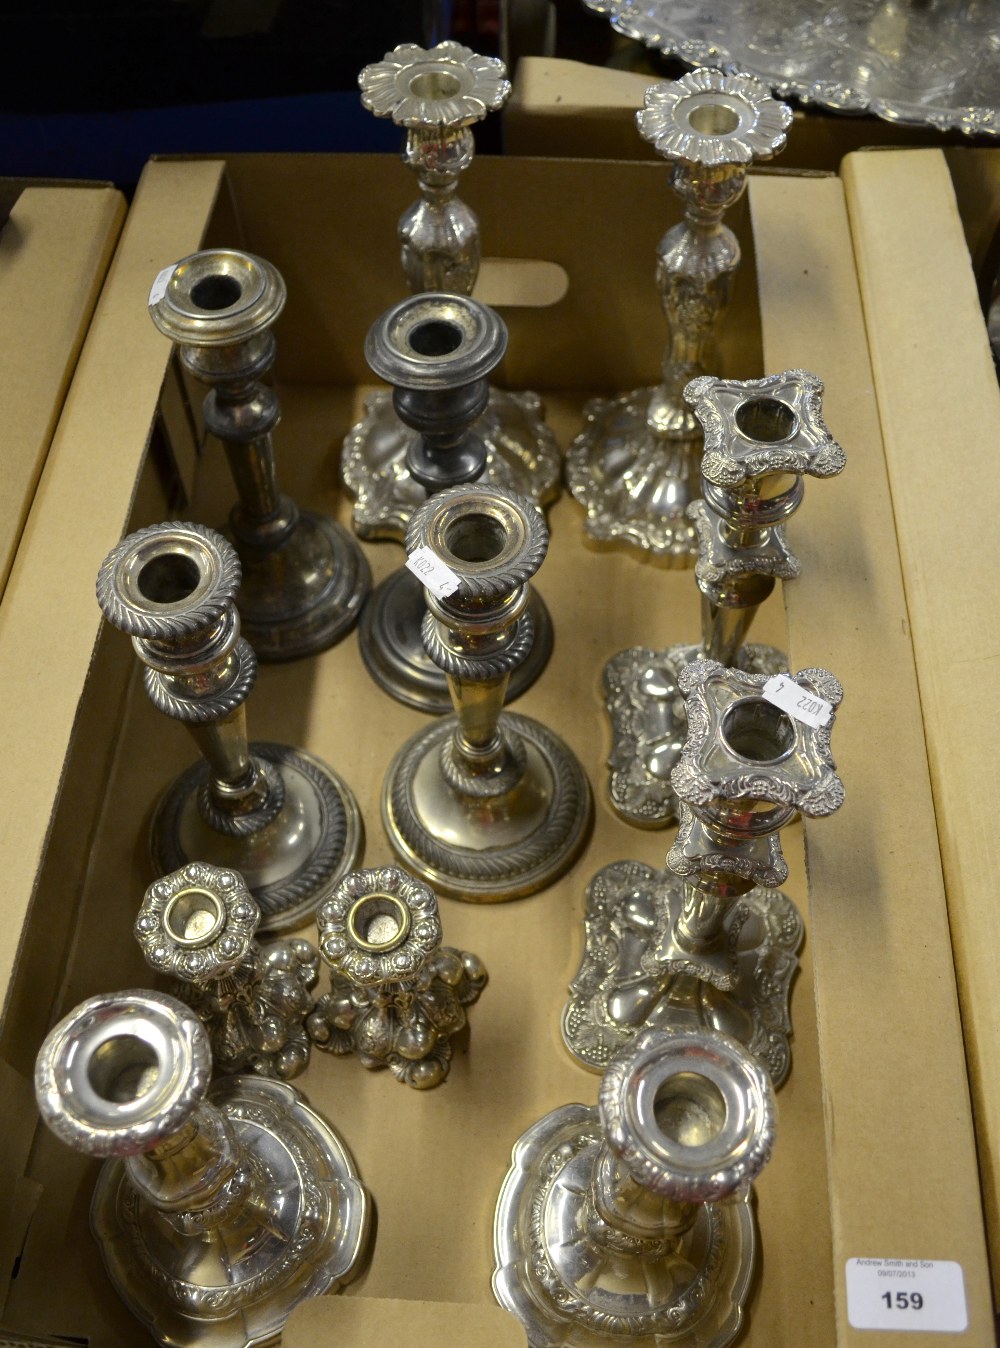 Six pairs of EP candlesticks